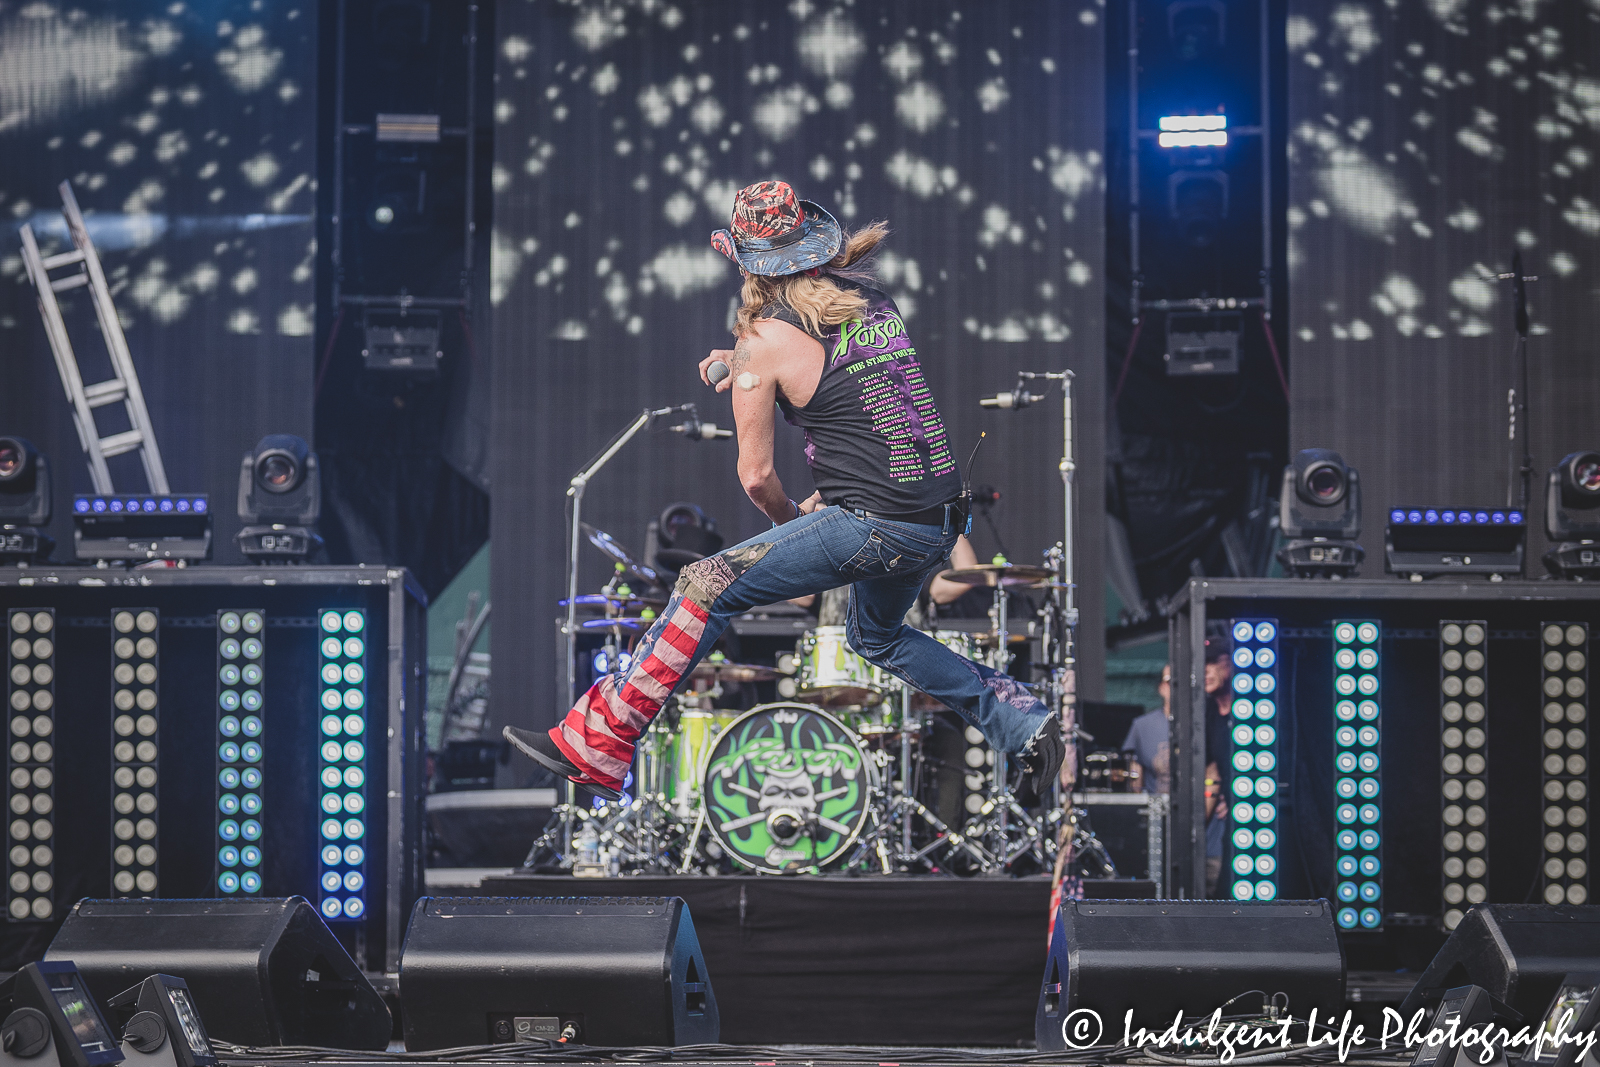 Bret Michaels defying gravity during a performance of "Ride the Wind" at Kauffman Stadium in Kansas City, MO on July 19, 2022.